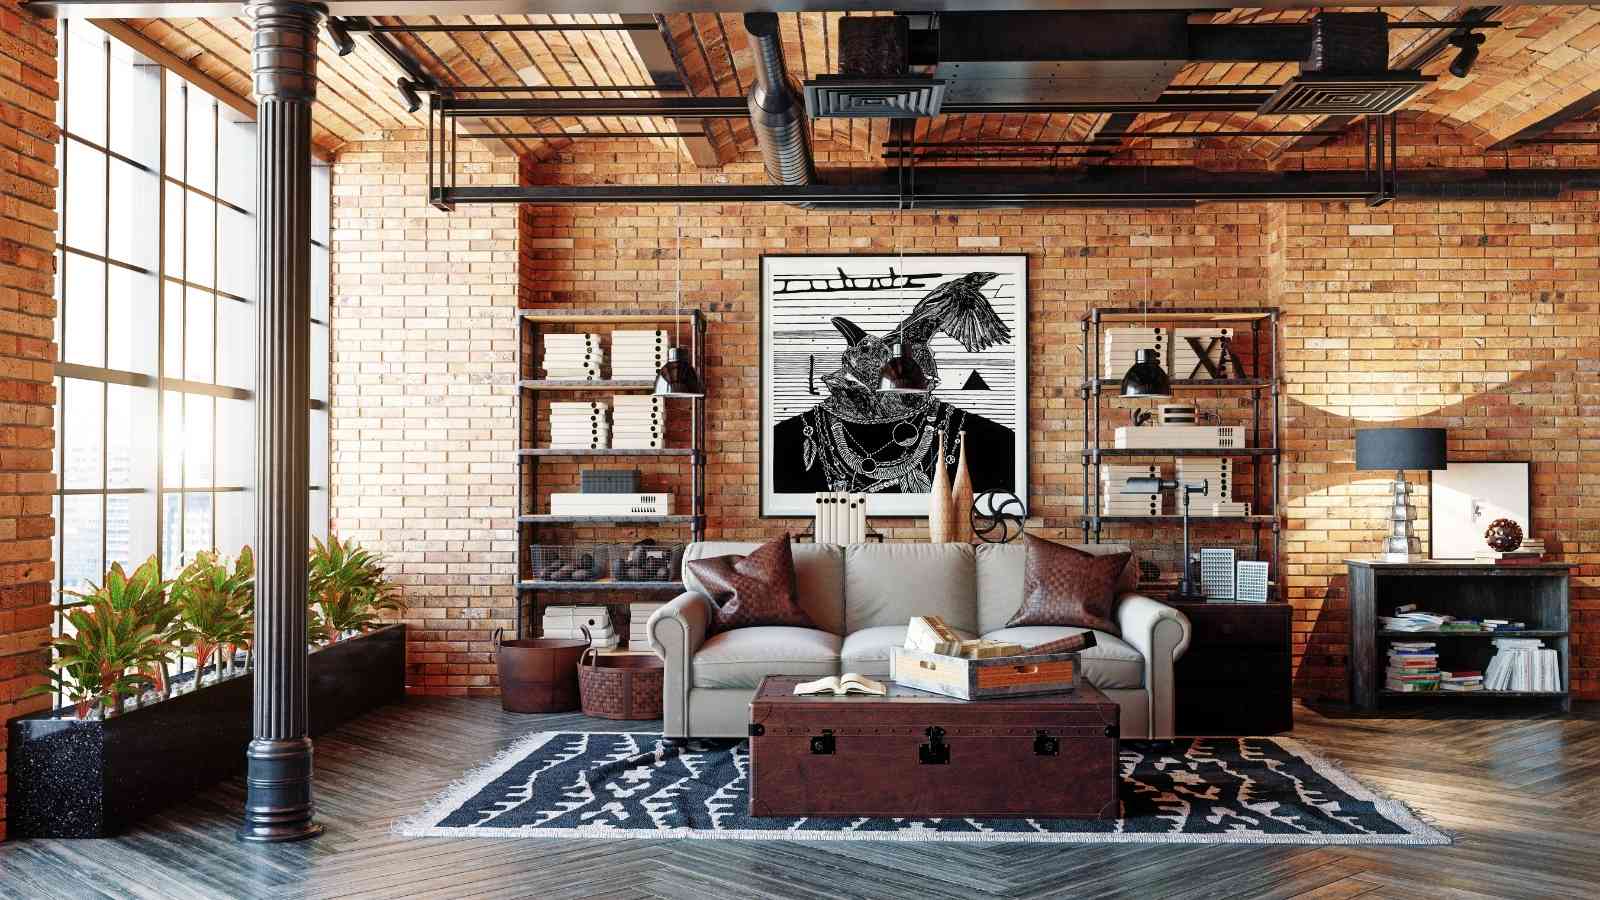 Using a Brick Wall as a Design Element in Your Home nigeriantech.com.ng